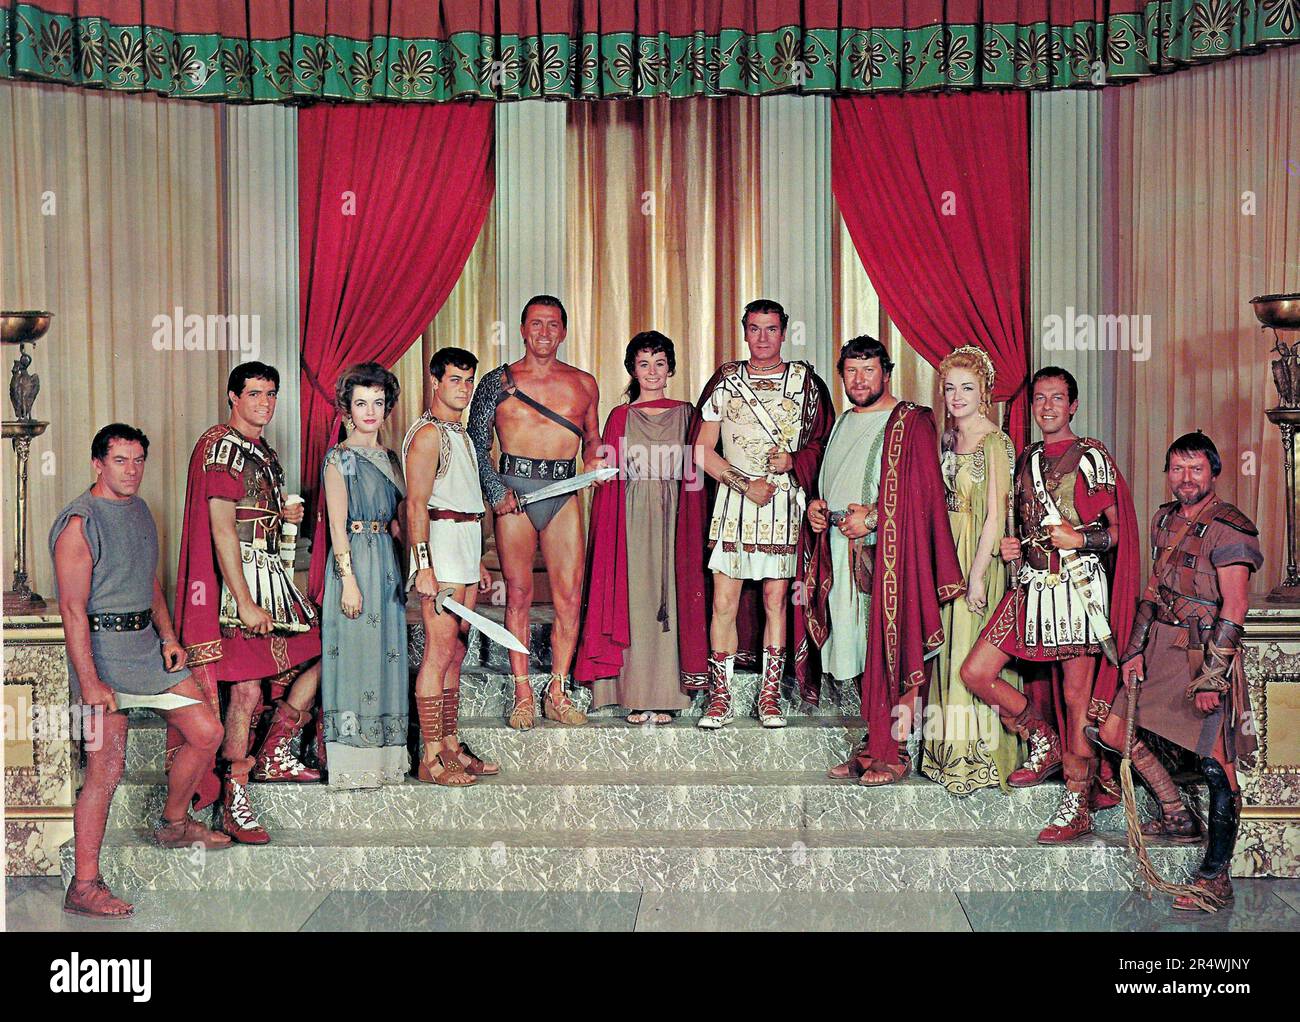 Spartacus is a 1960 American epic historical drama film directed by Stanley Kubrick and starring Kirk Douglas as the rebellious slave of the title. The screenplay was based on the novel Spartacus by Howard Fast. It was inspired by the life story of the historical figure Spartacus and the events of the Third Servile War. Stock Photo